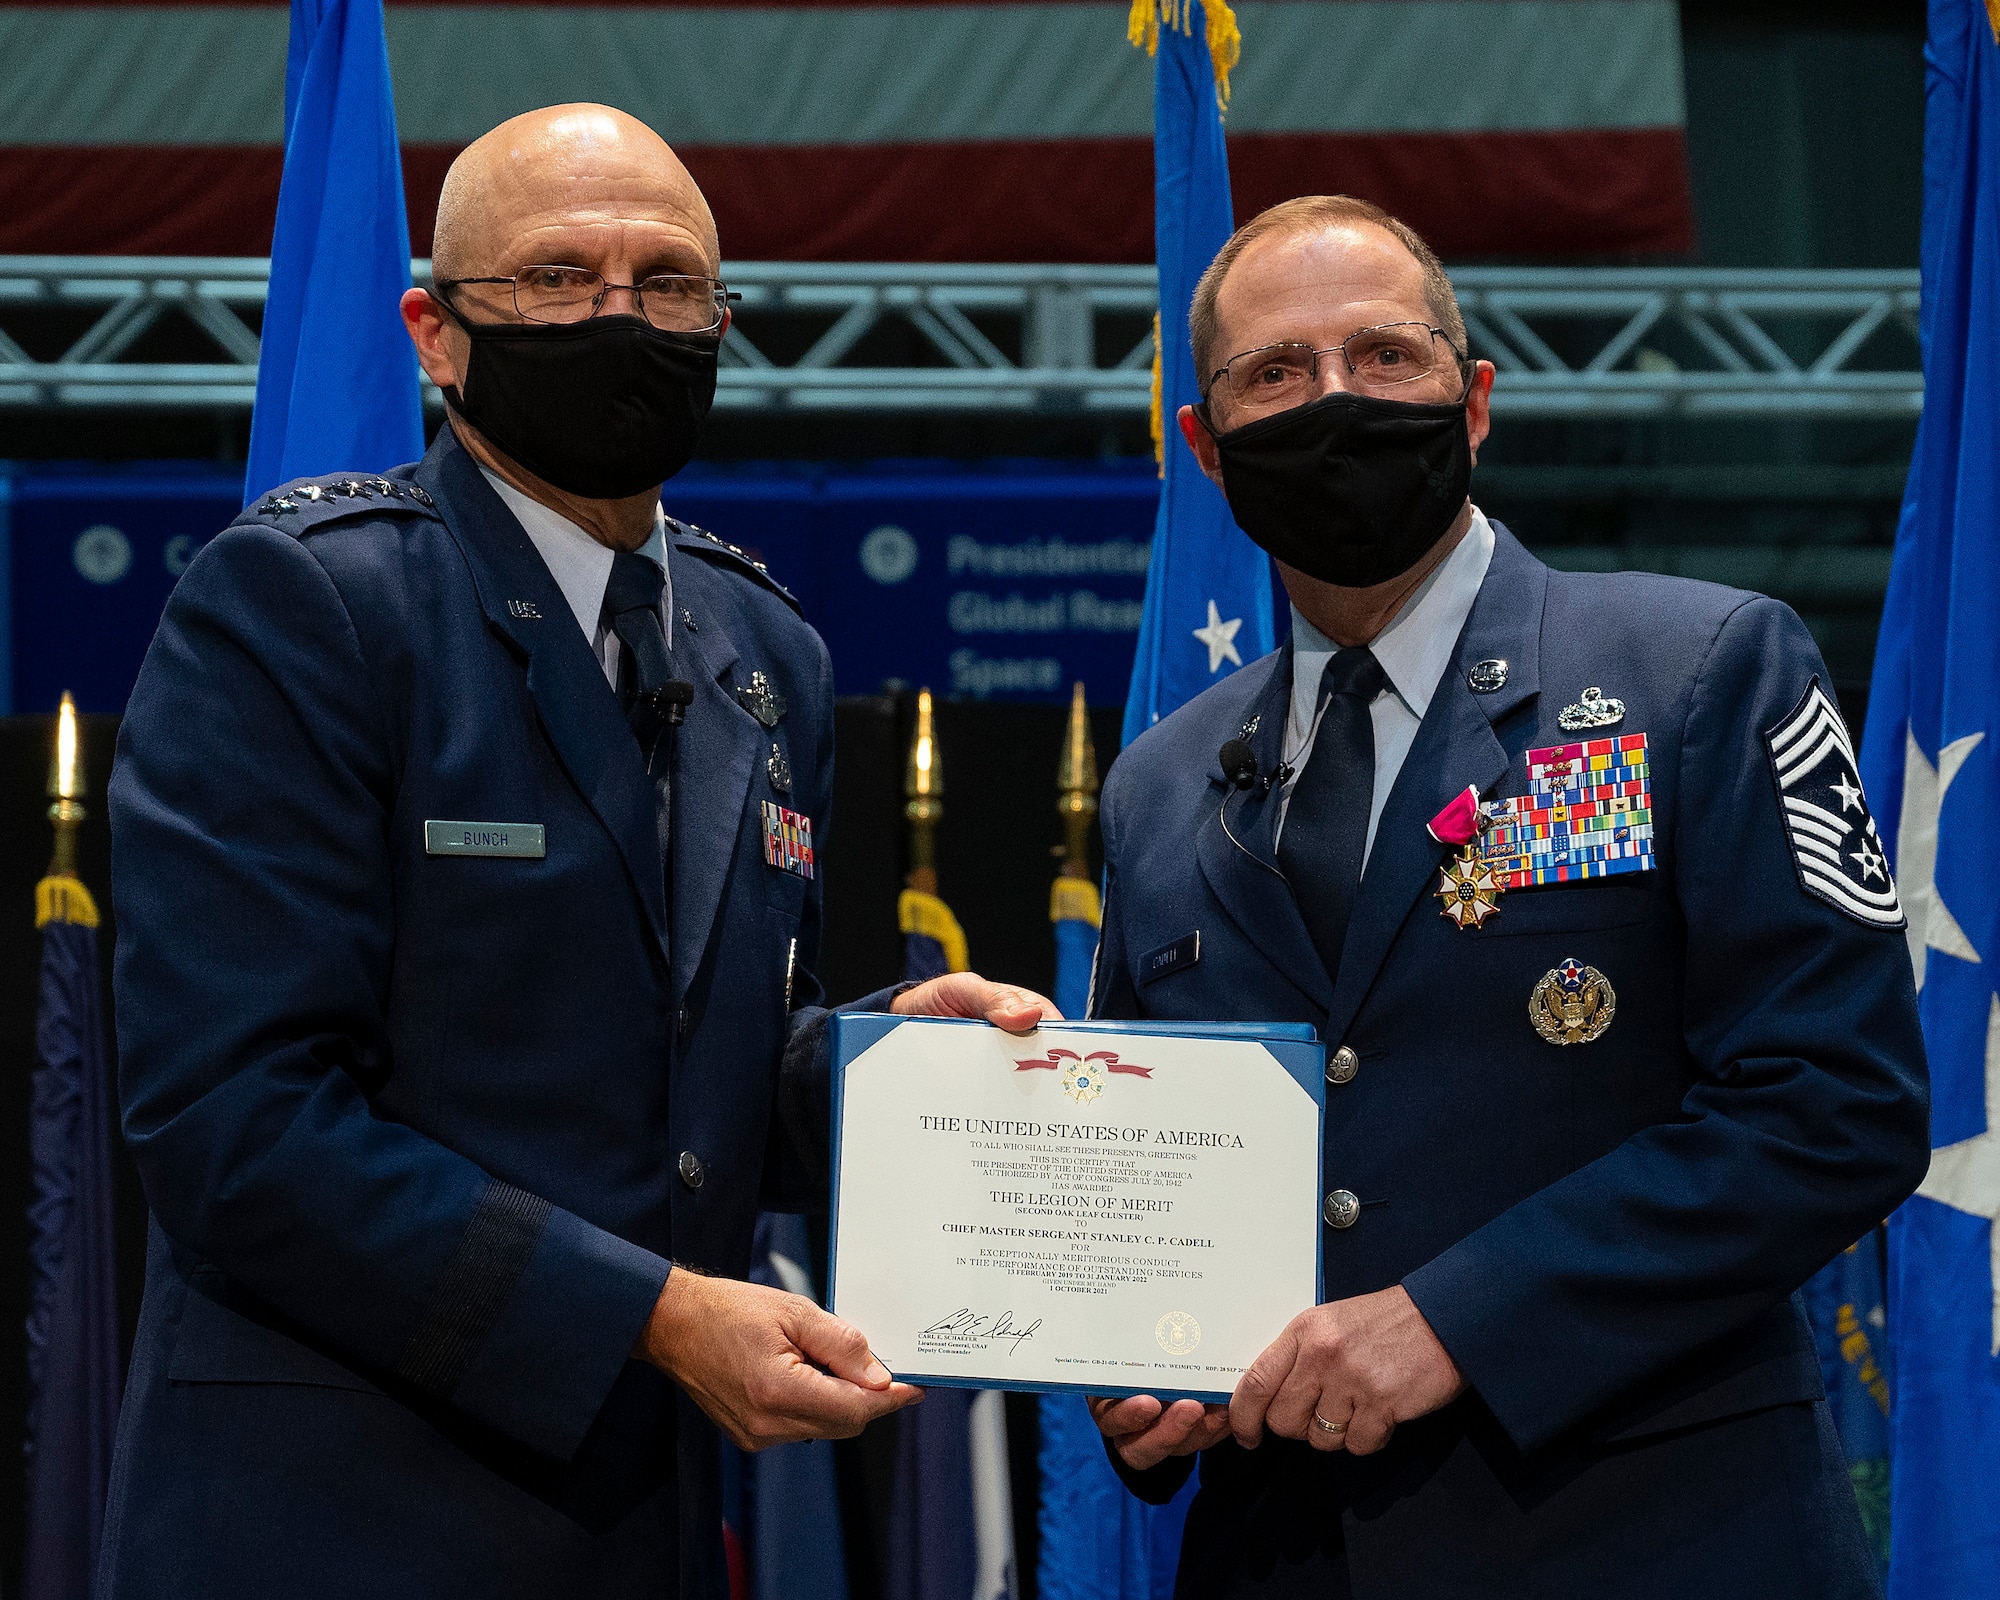 Gen. Arnold Bunch Jr. (left), commander of Air Force Materiel Command, presents the Legion of Merit to Chief Master Sgt. Stanley Cadell during the AFMC command chief’s retirement ceremony Oct. 1, 2021,  in the National Museum of the U.S. Air Force at Wright-Patterson Air Force Base, Ohio. (U.S. Air Force photo by R.J. Oriez)